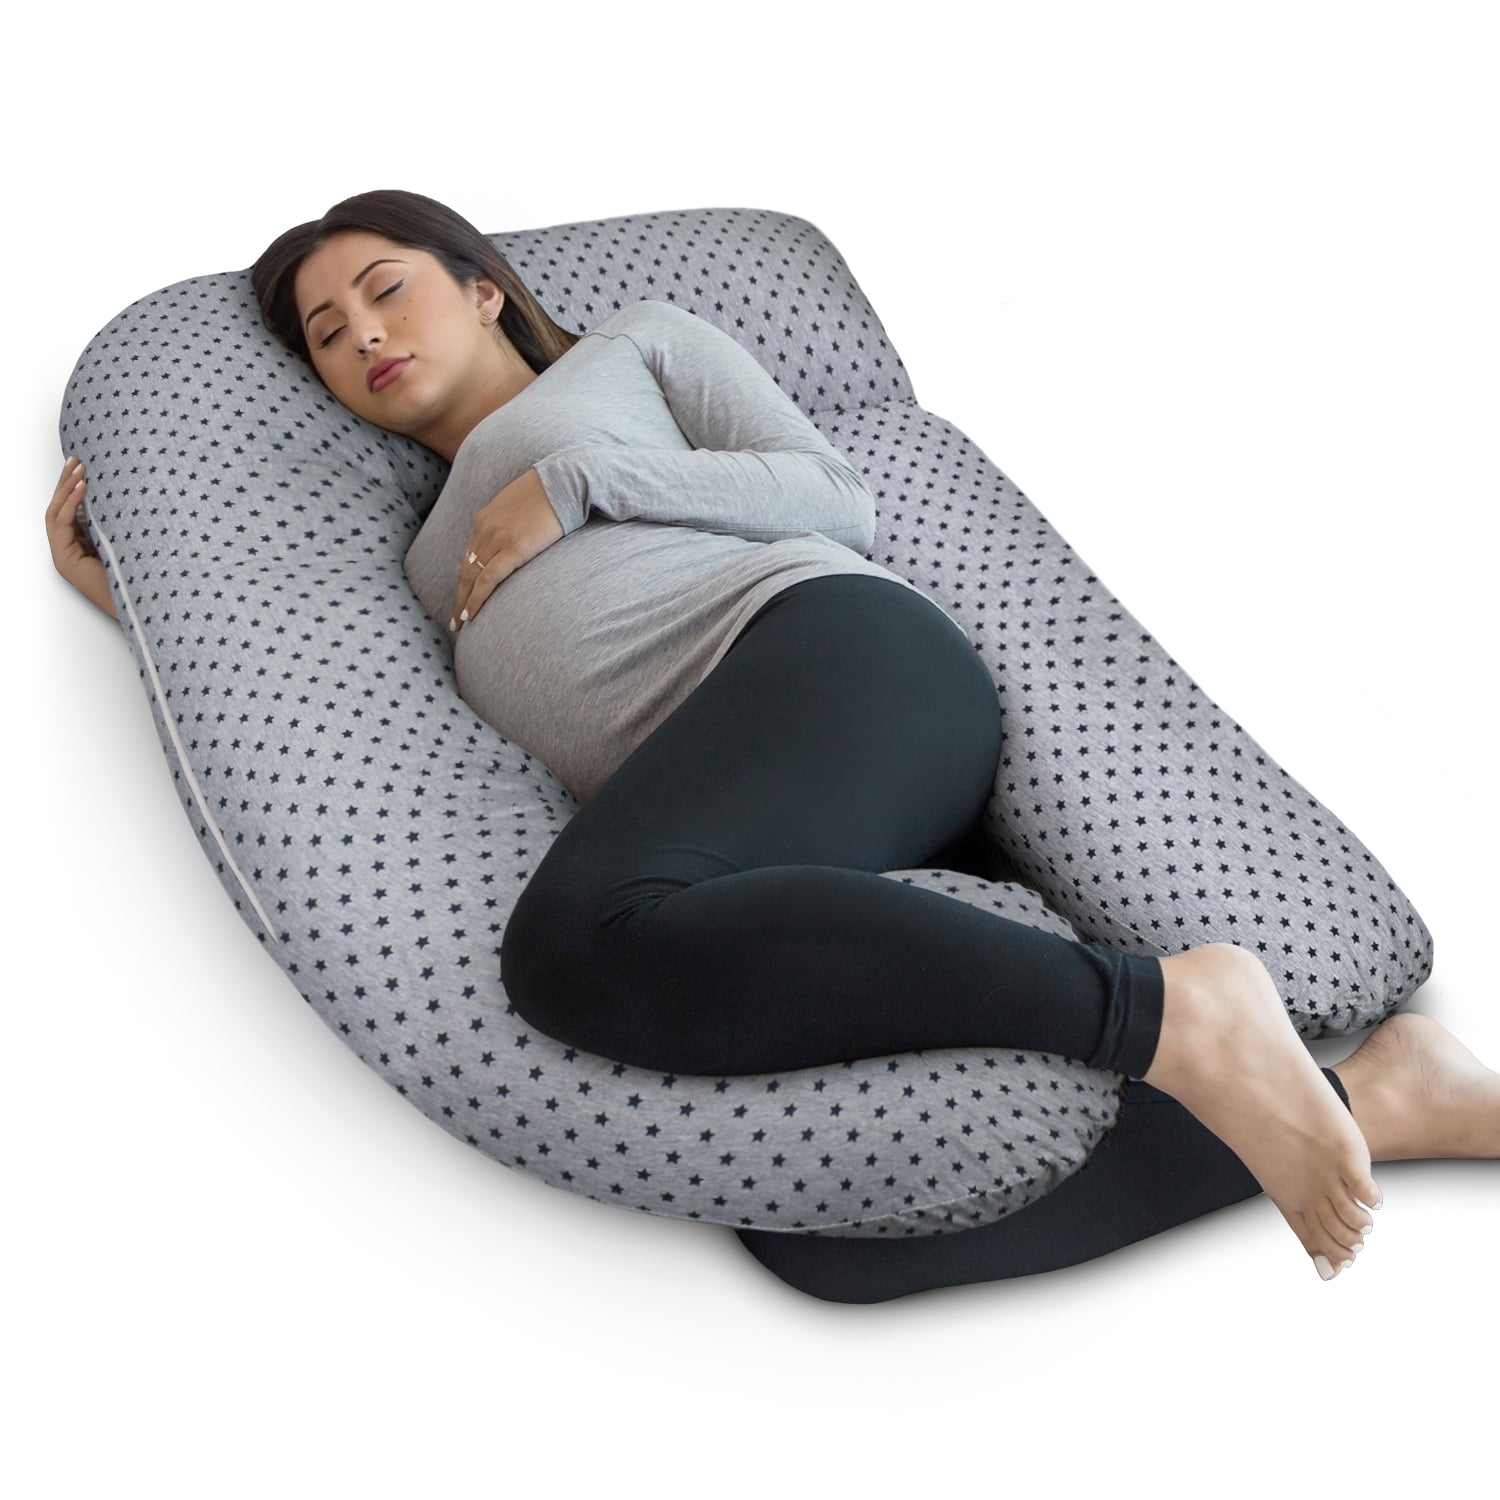 Pregnancy Pillow Set Multifunctional Storage Cushions-Relax Pillow 